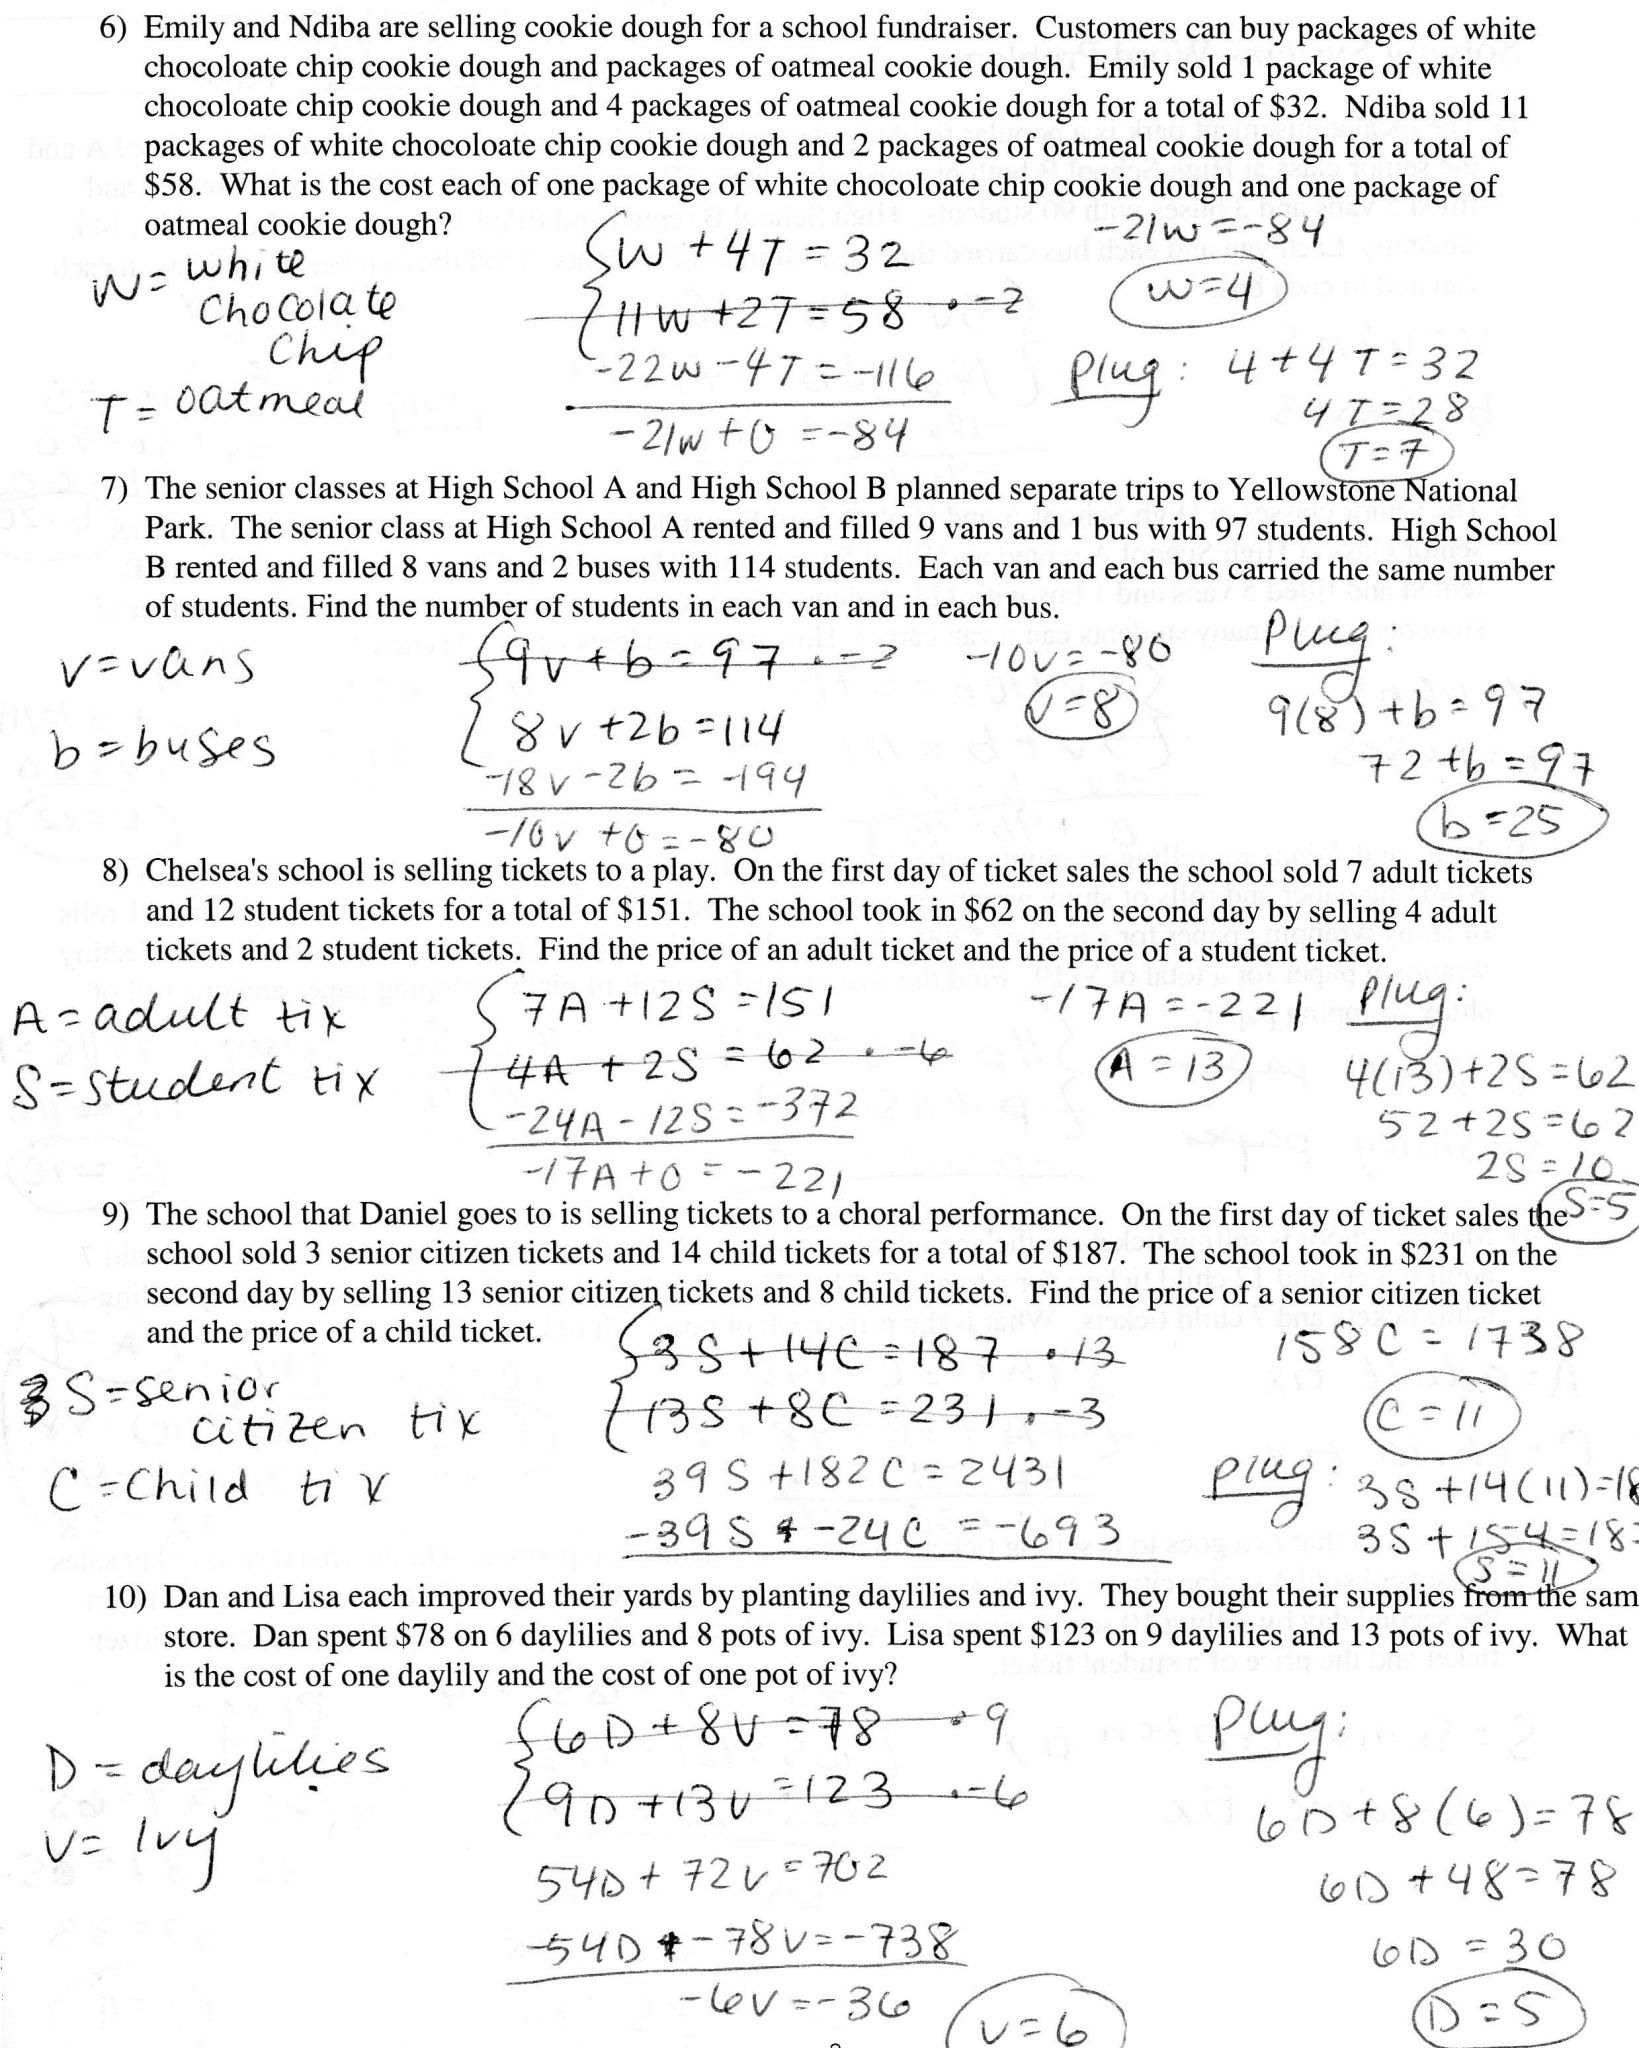 solving-equations-with-variables-on-both-sides-worksheet-8th-grade-db-excel